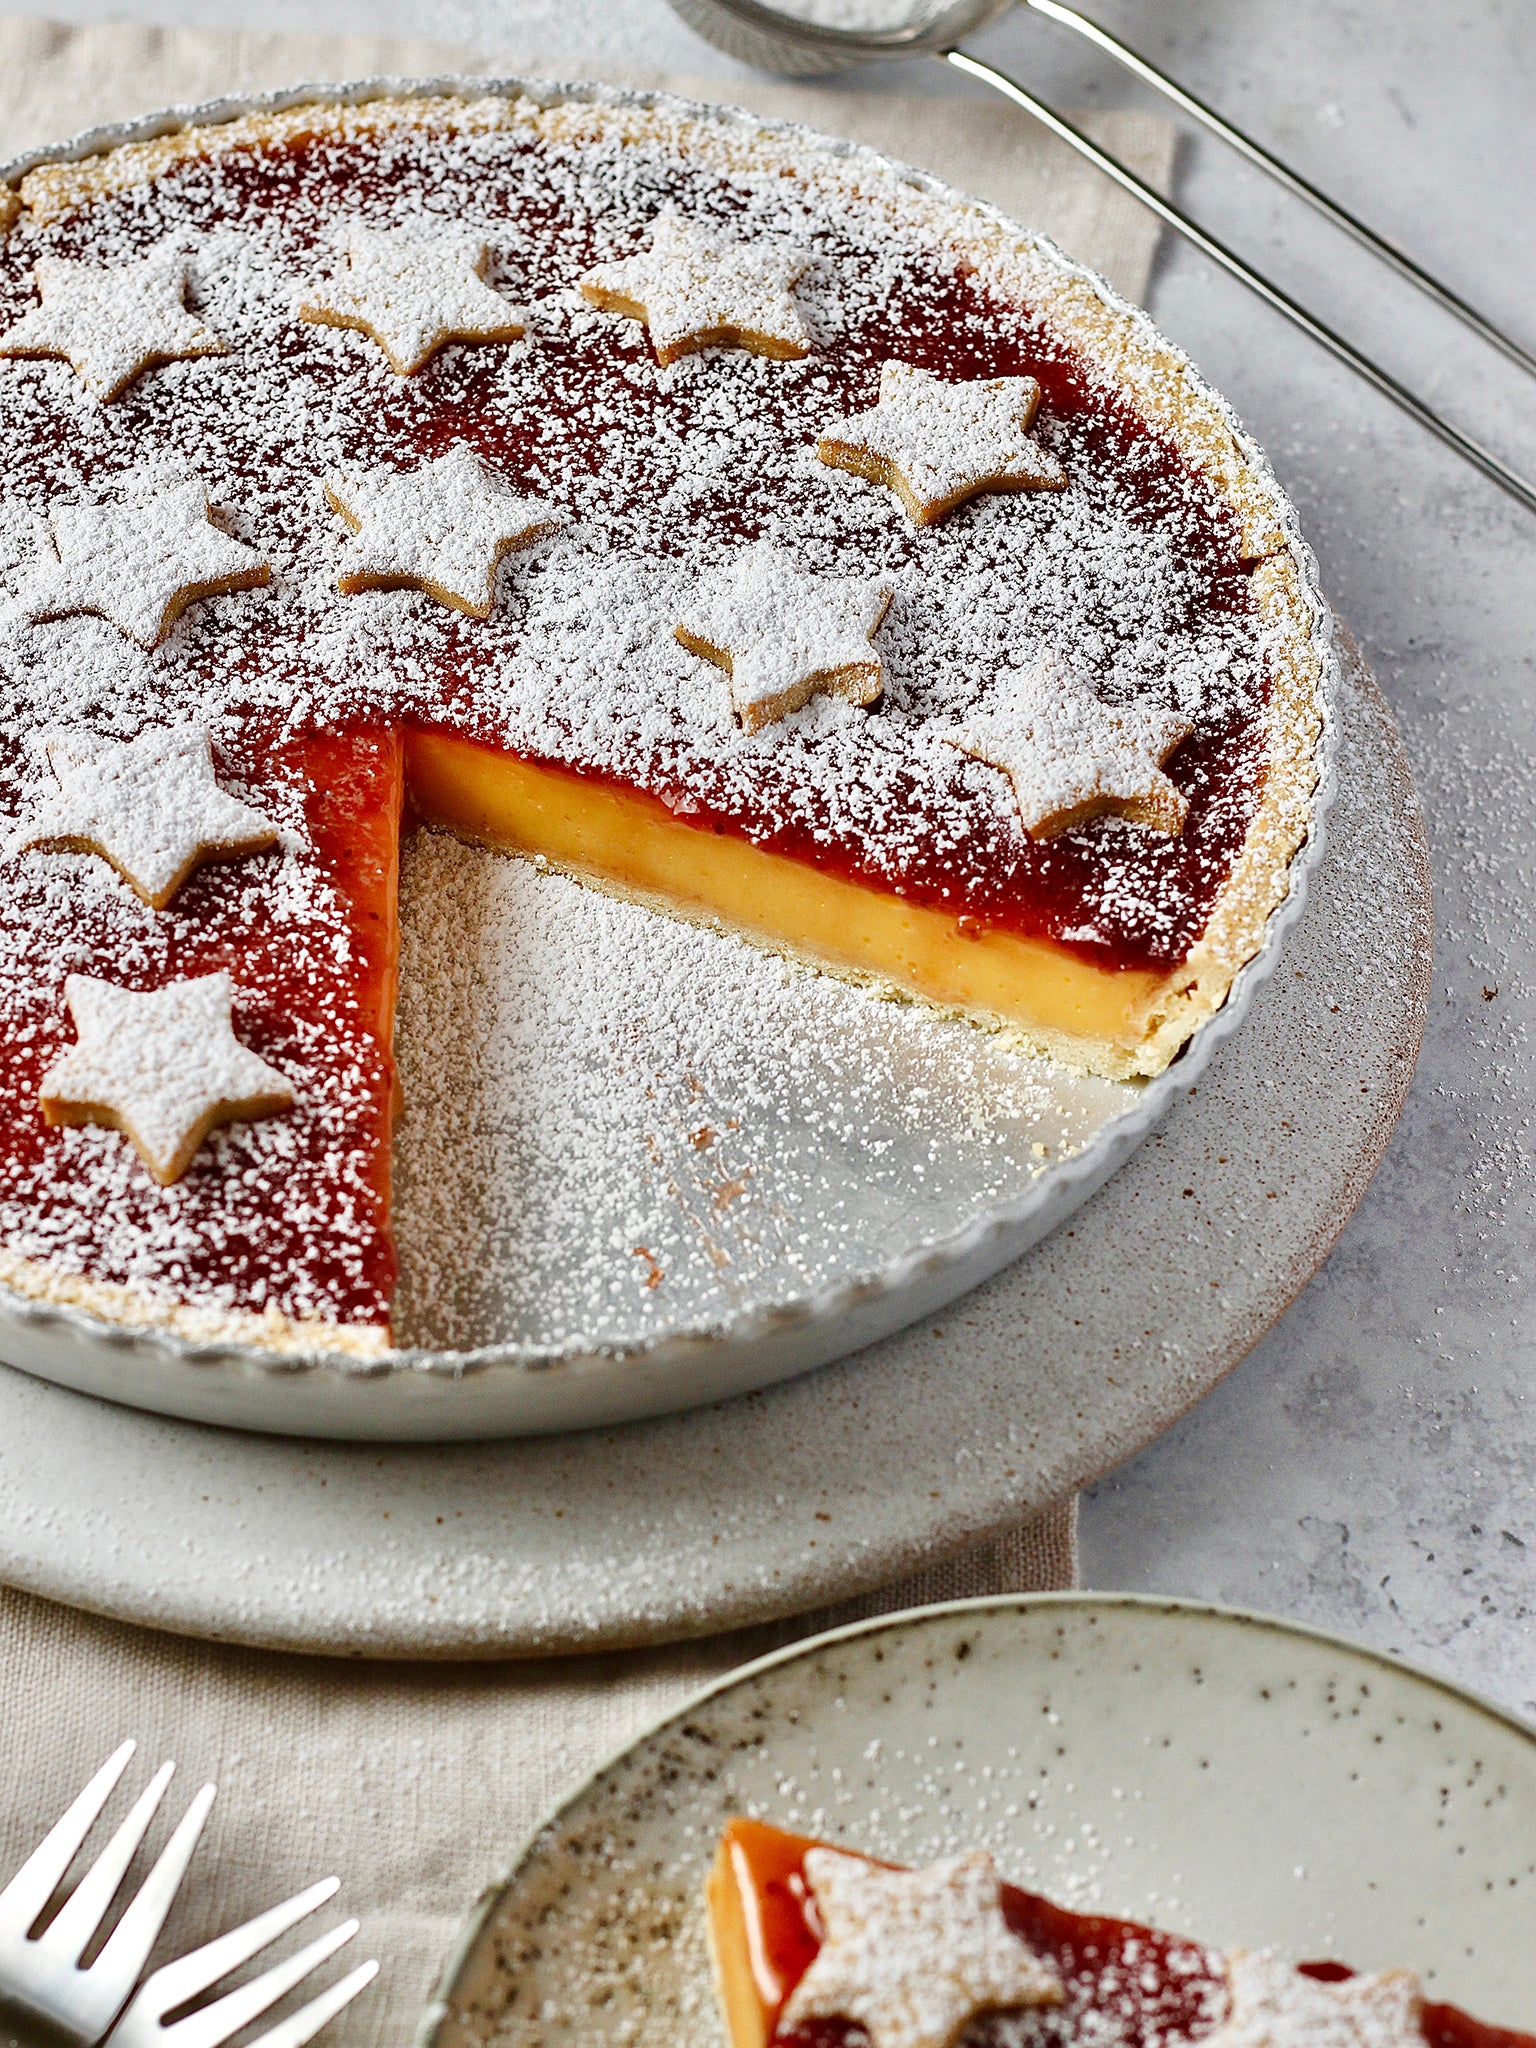 Not just for Christmas, this gorgeous tart will make your tummy sing Hallelujah